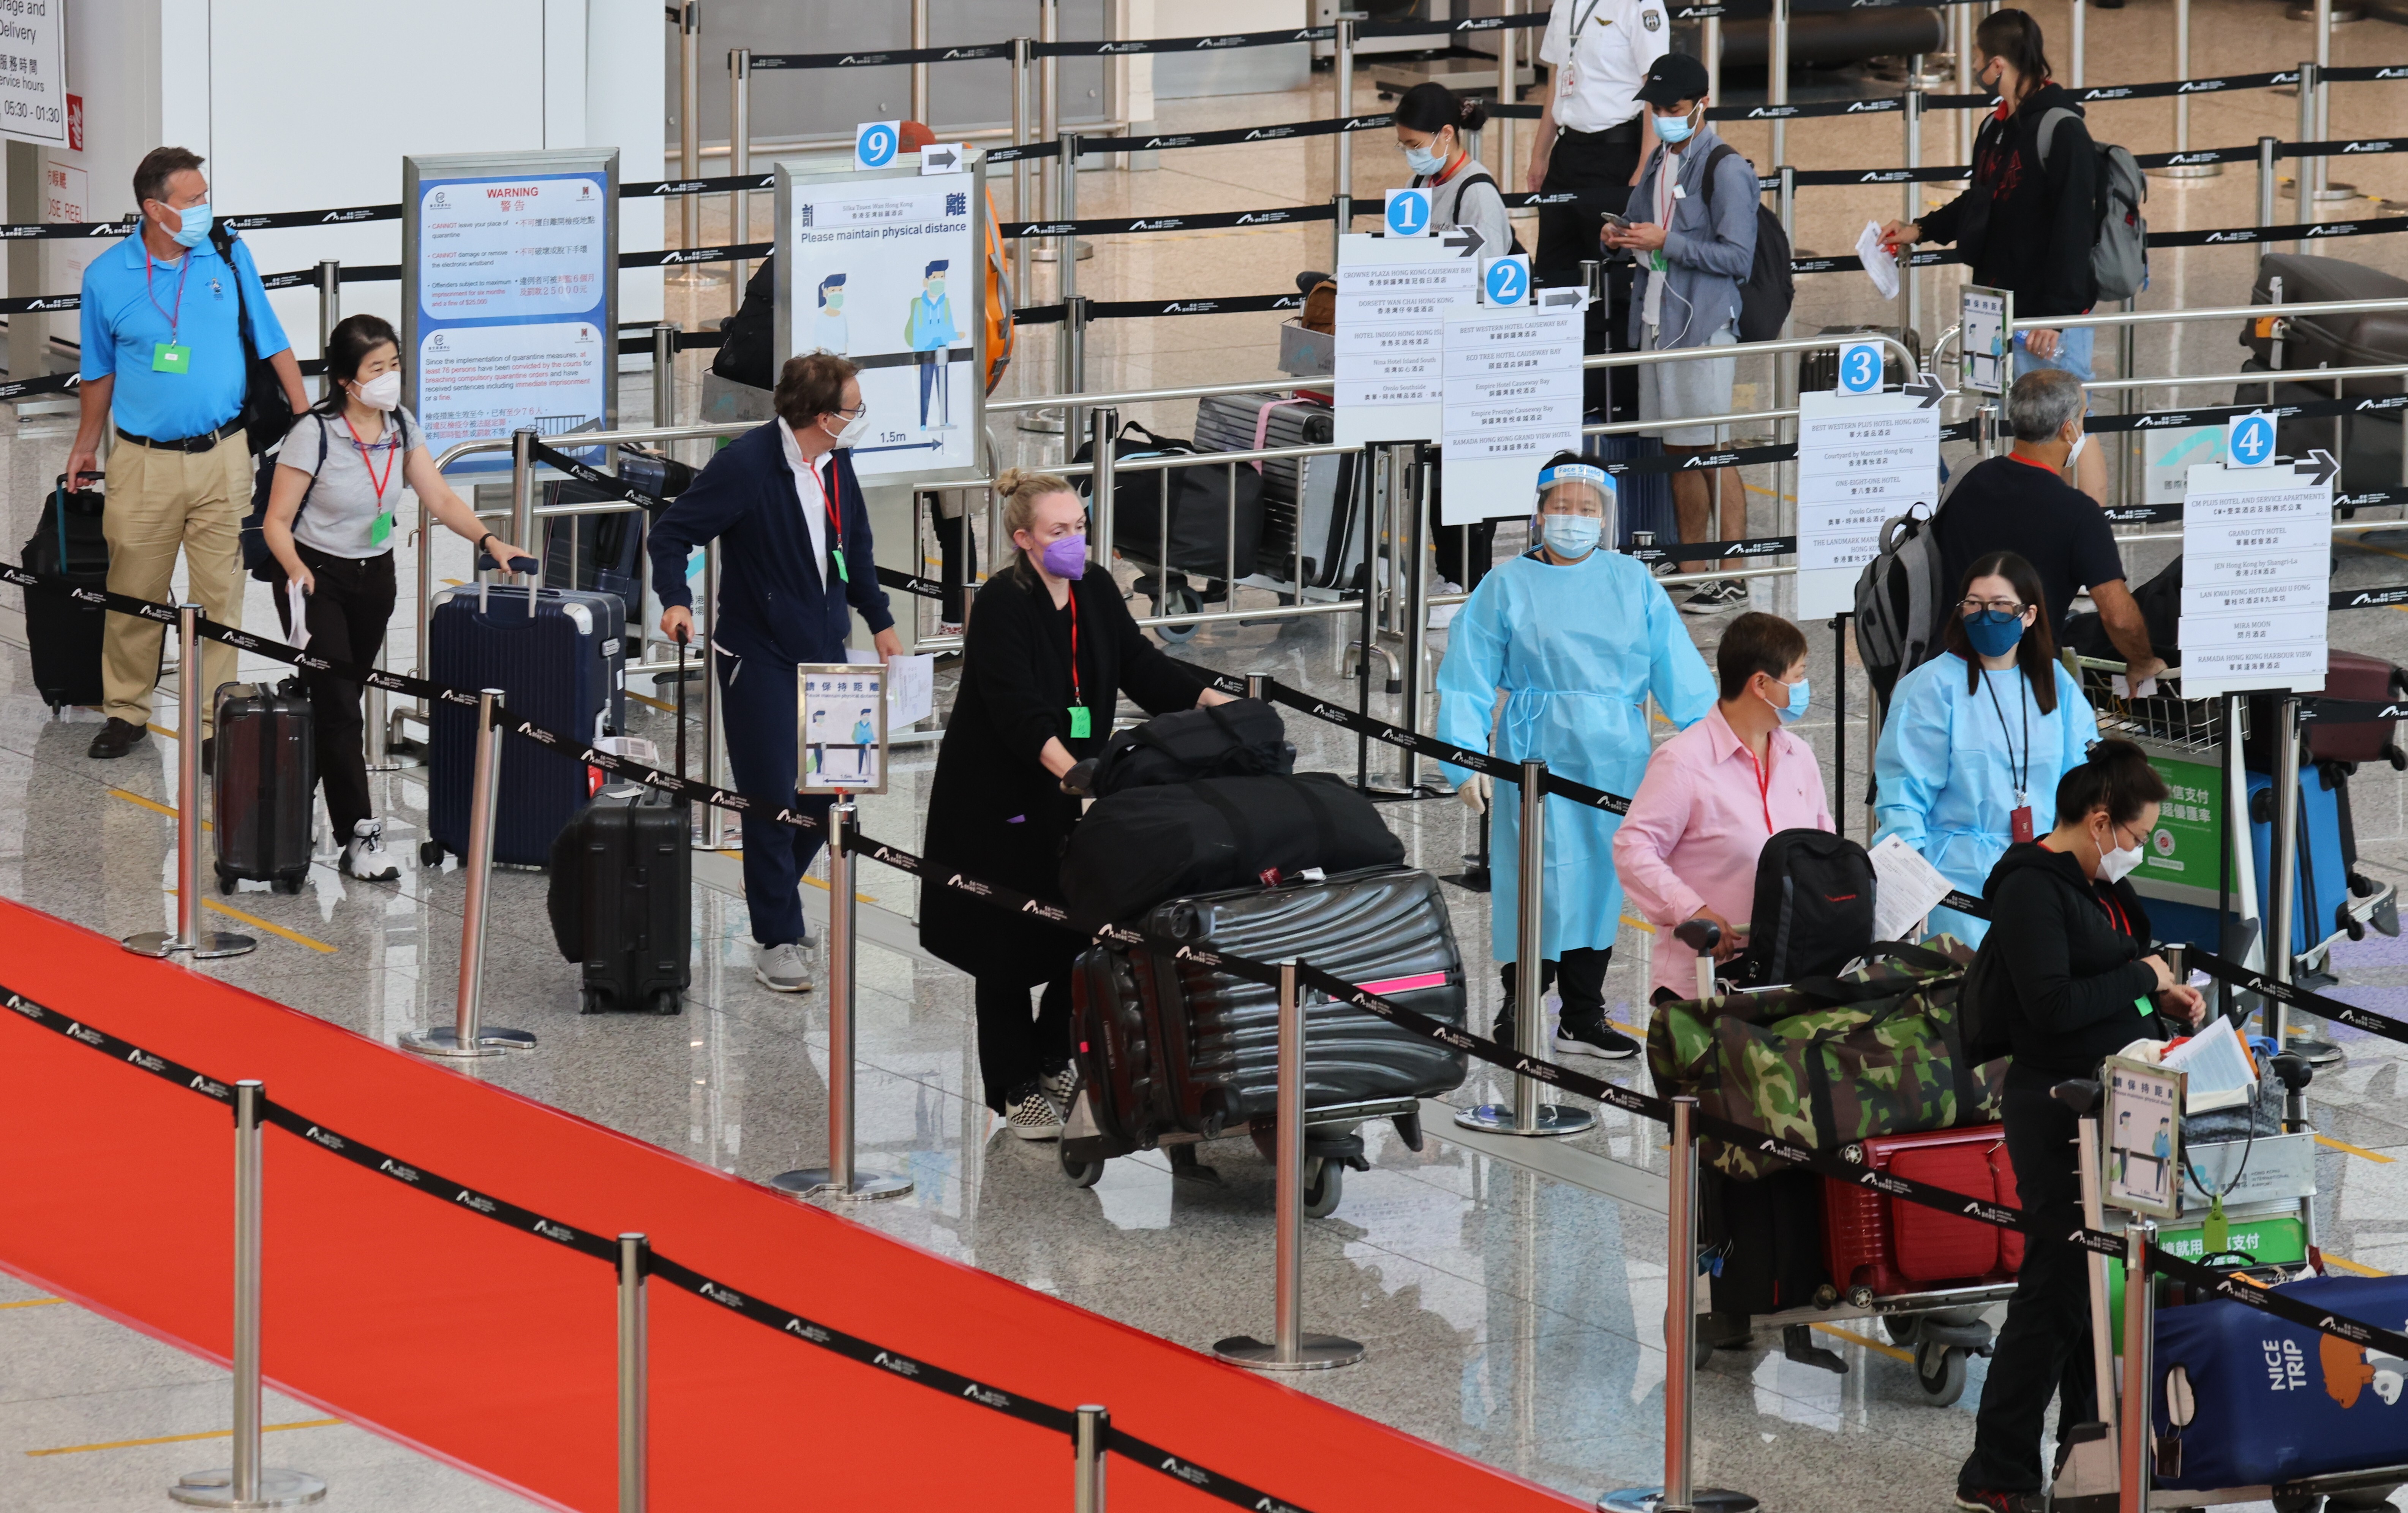 Inbound travellers arriving at Hong Kong International Airport getting in queue to be transported to quarantine hotels in the city on 2 September 2021. Photo: Dickson Lee